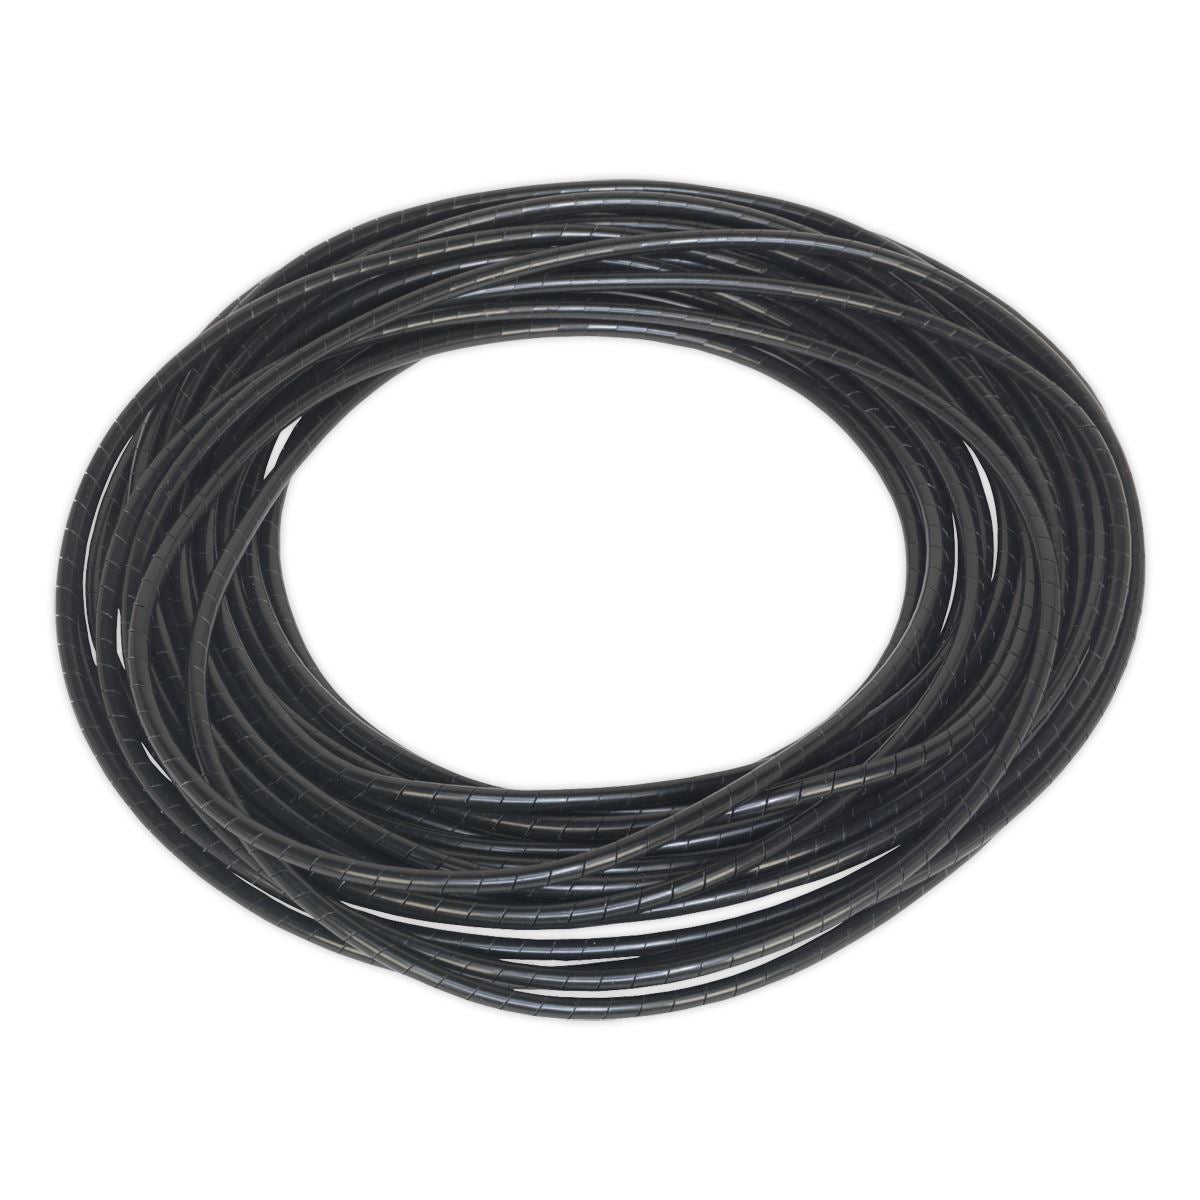 Sealey Spiral Wrap Cable Sleeving Ø4-8mm 10m